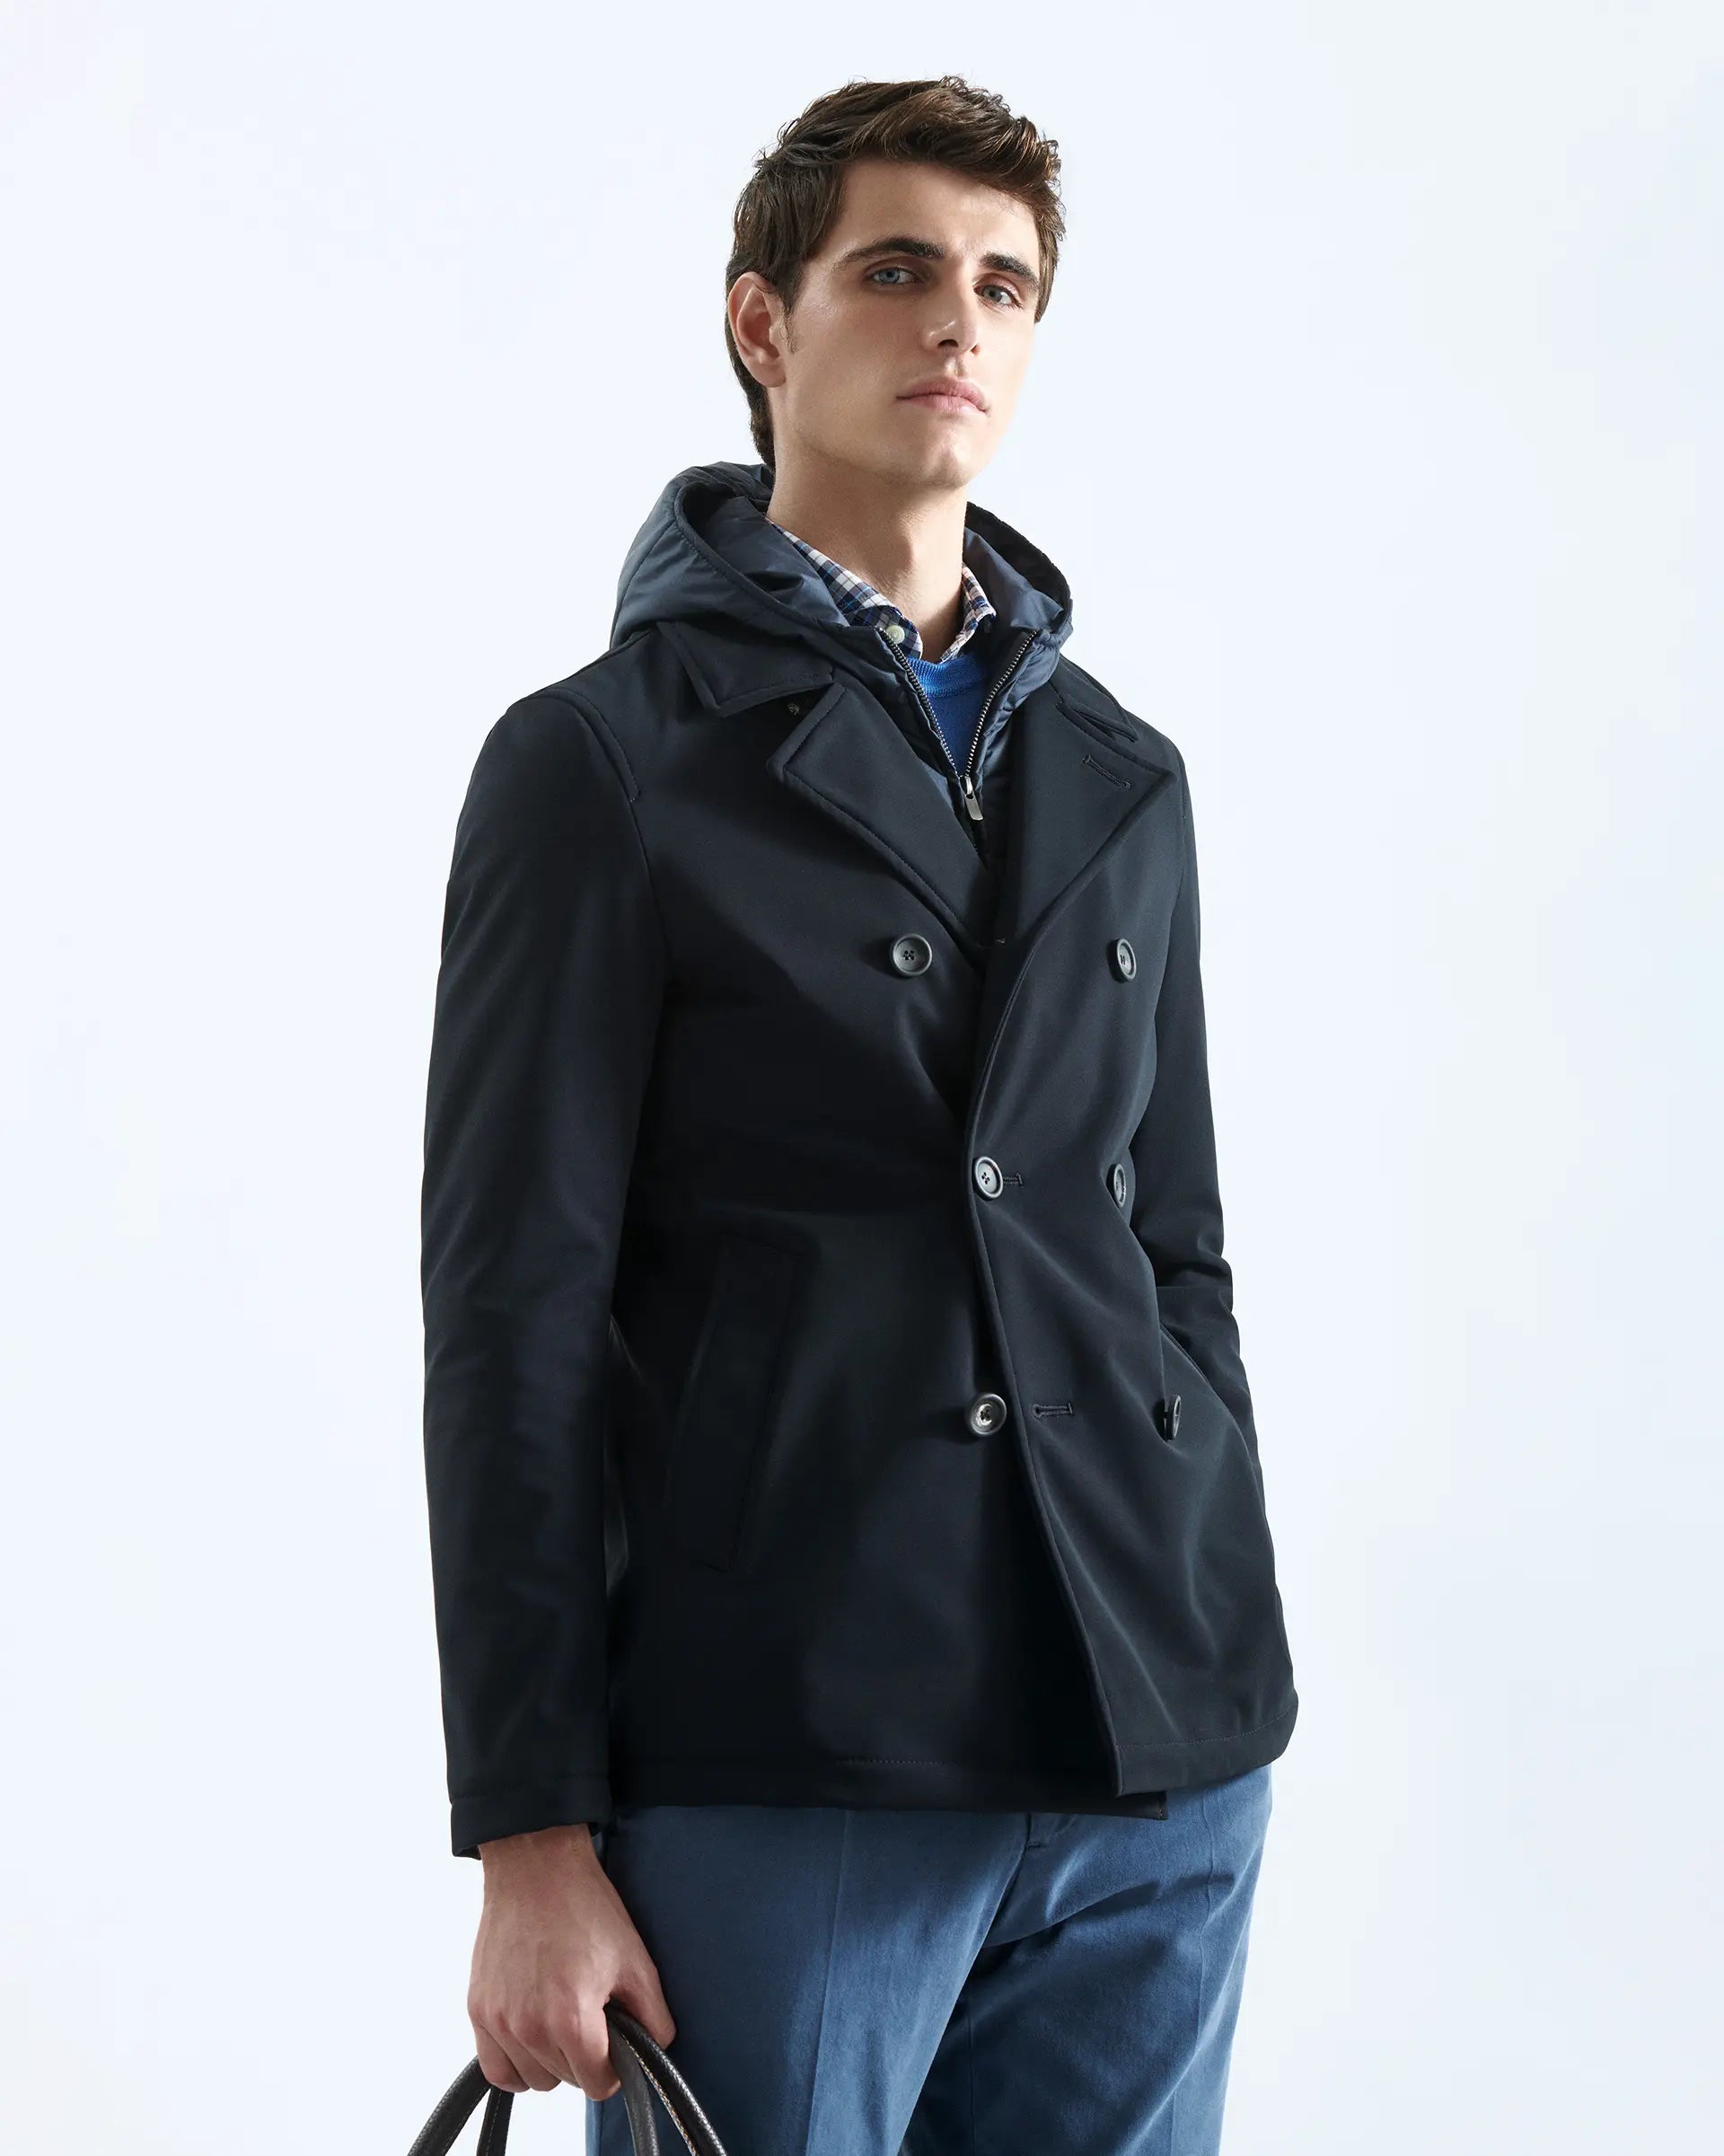 Double-breasted blue pea coat with bib in stretch technical fabric